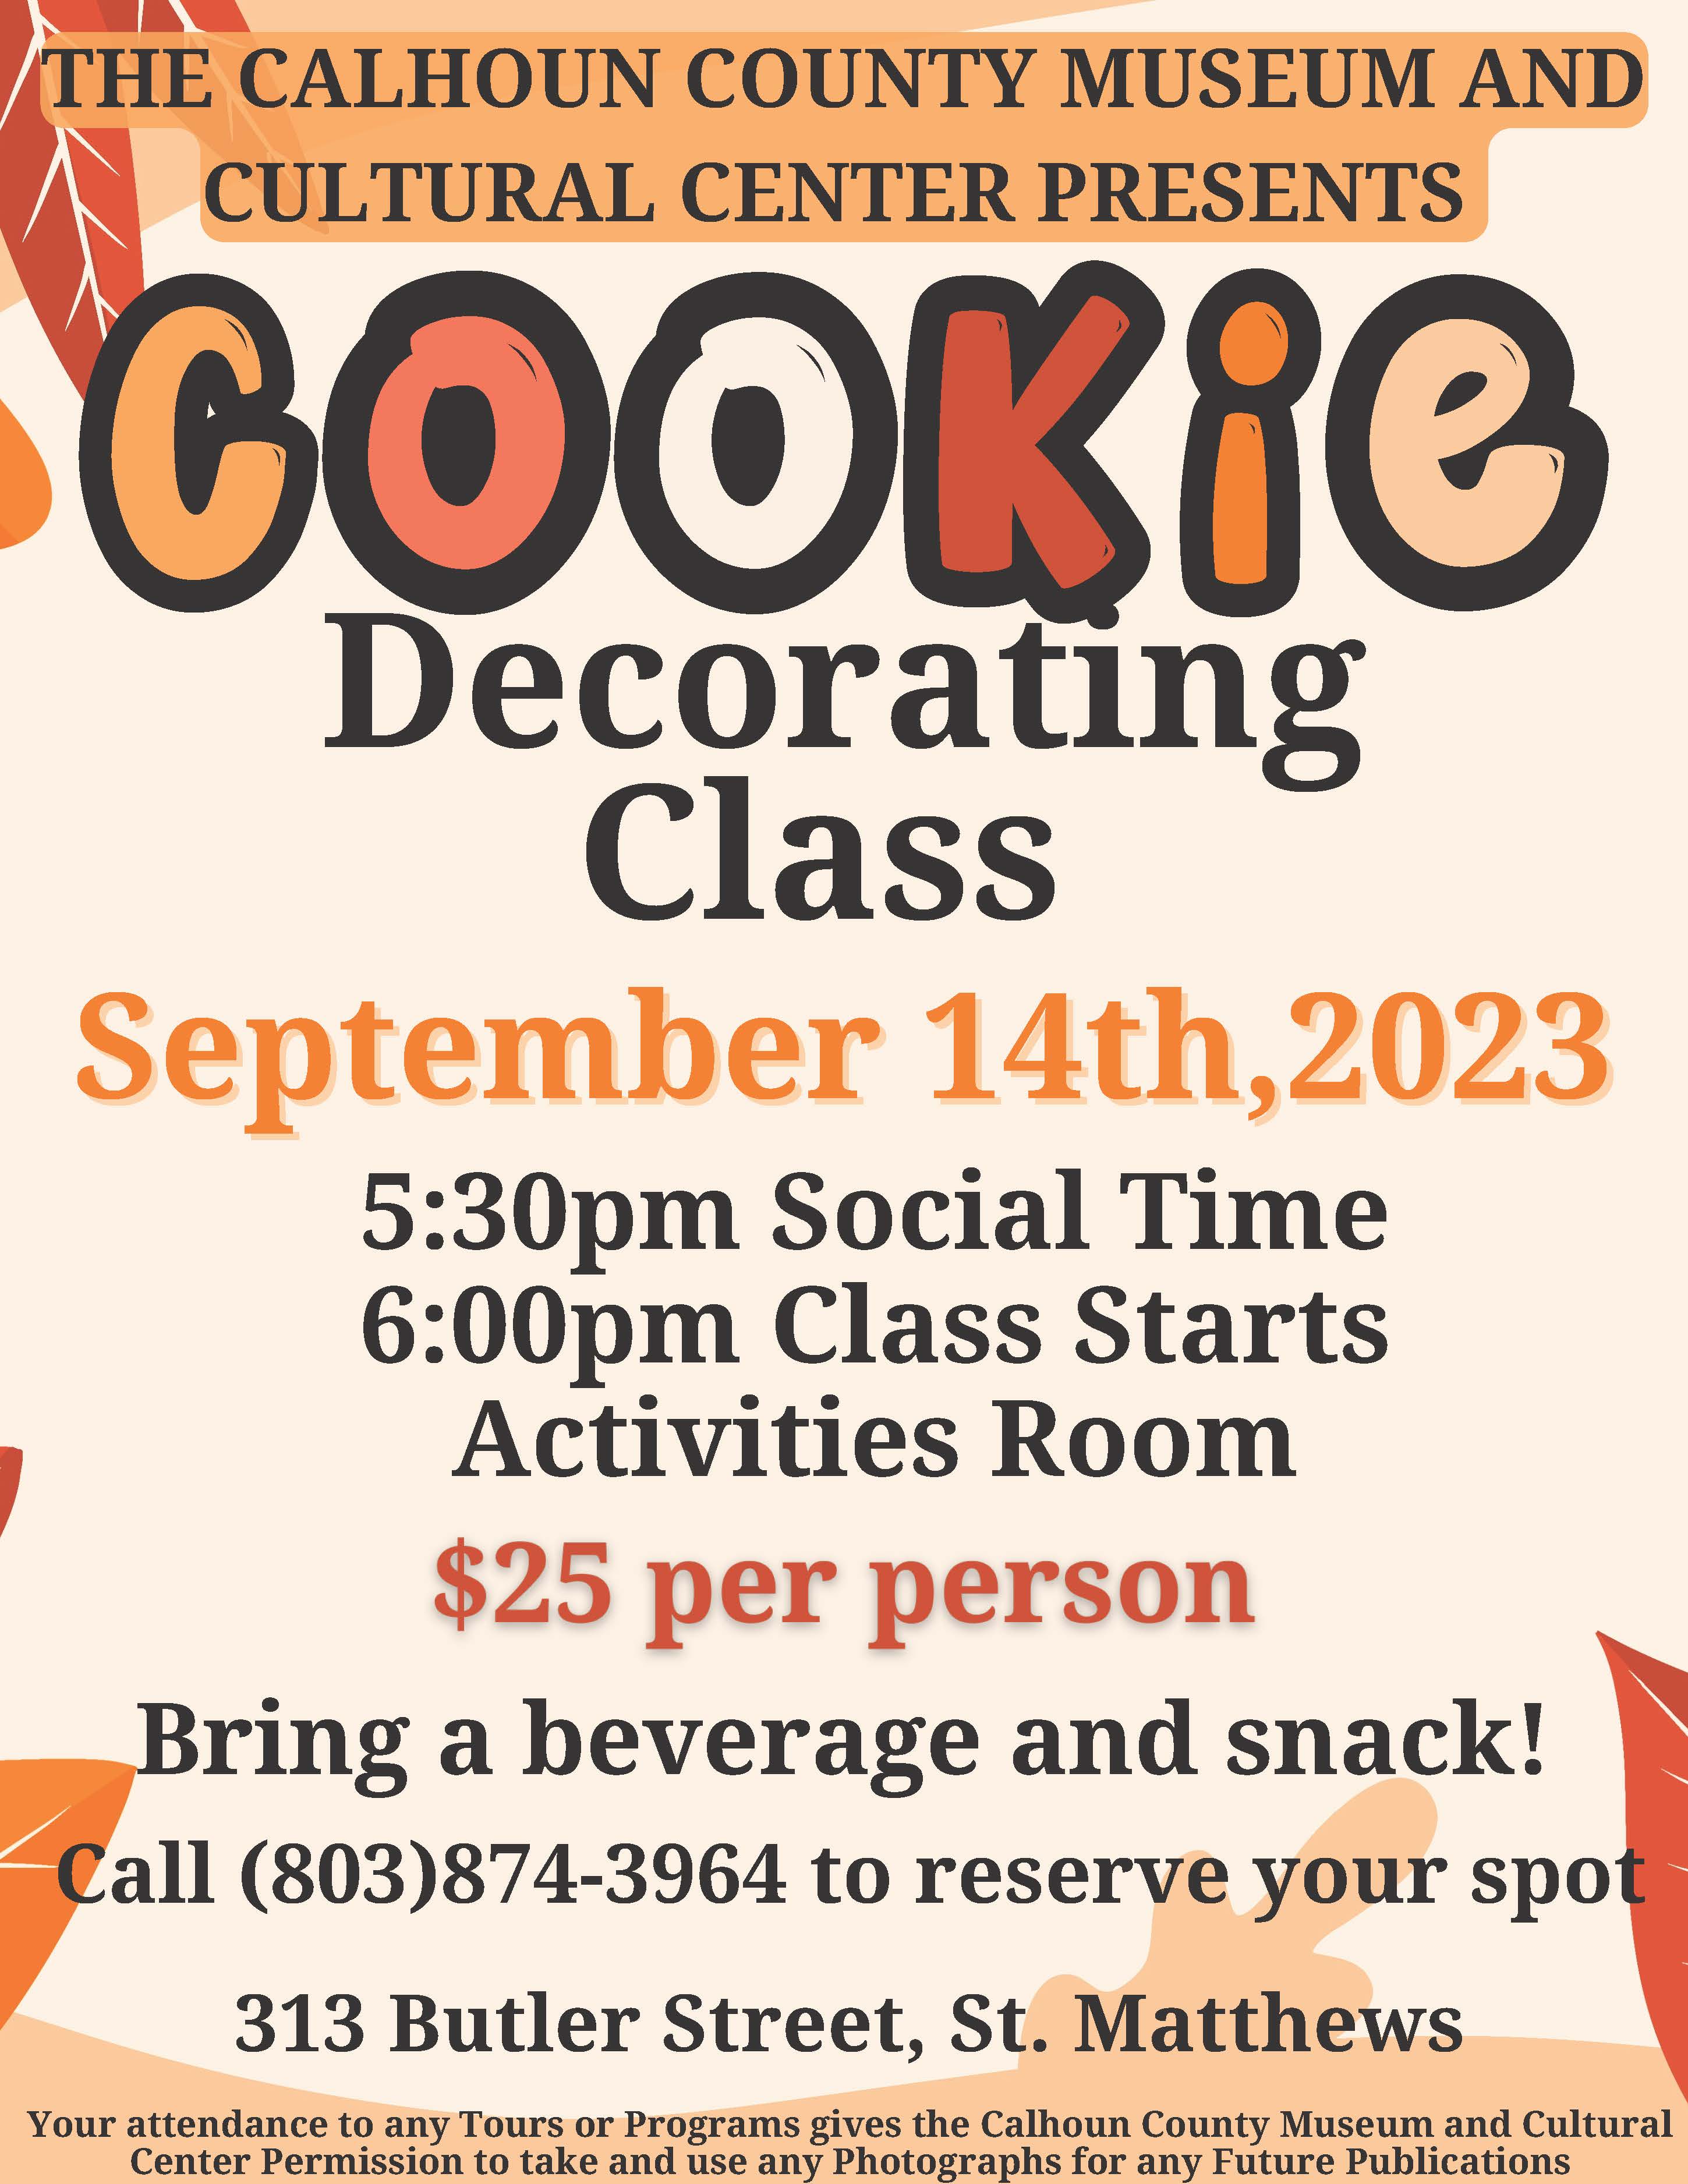 Join us for the 2023 Fall/Halloween Cookie Decorating Class